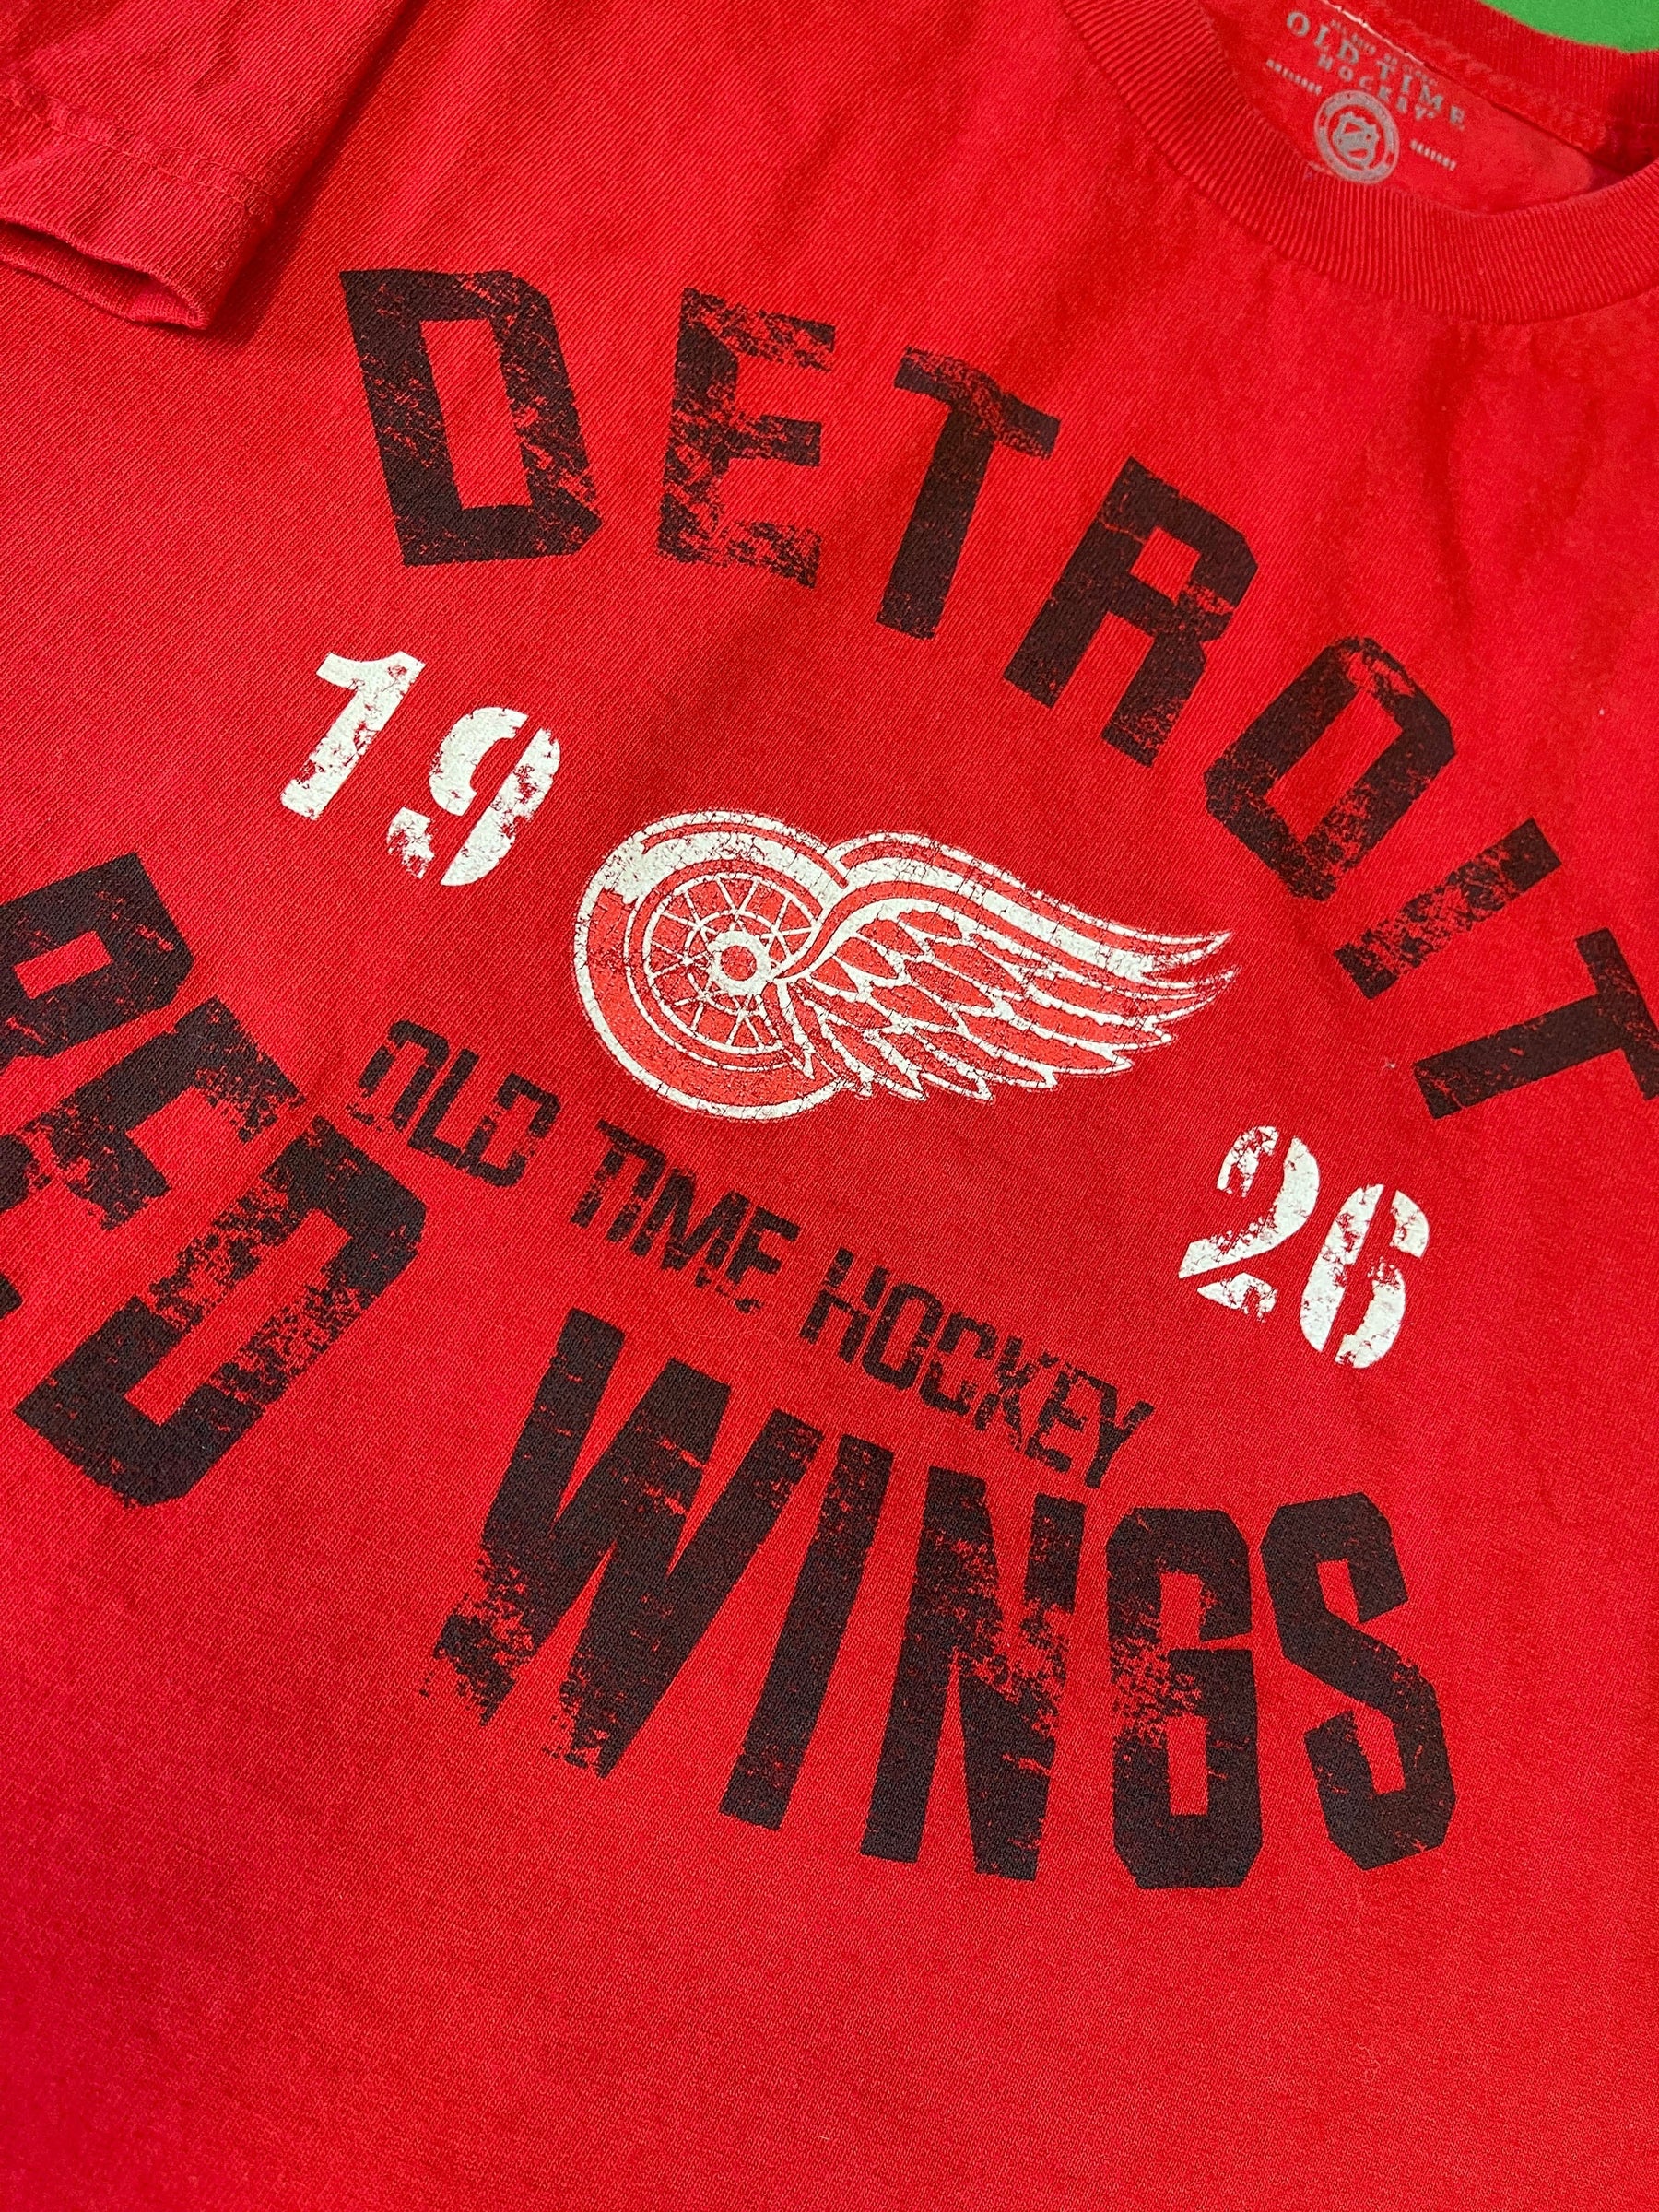 NHL Detroit Red Wings 100% Cotton T-Shirt Youth Medium